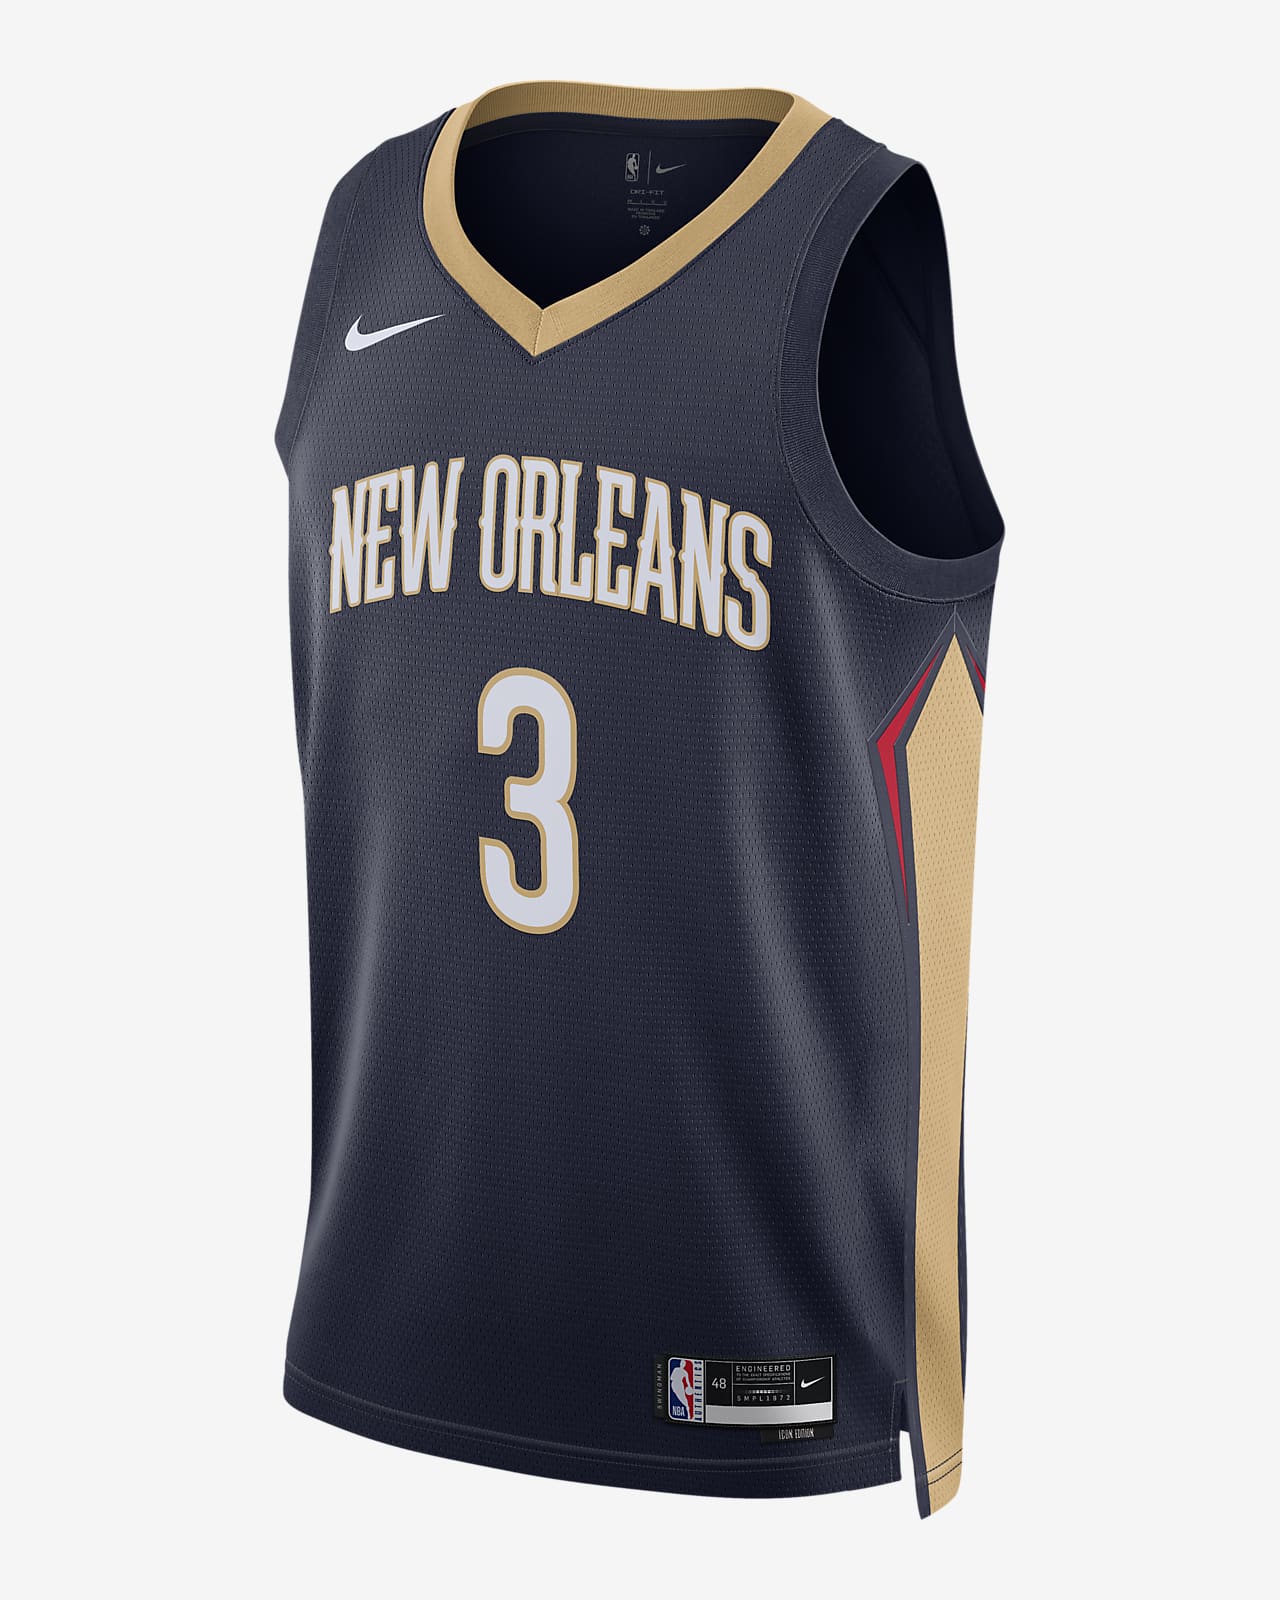 Pelicans player edition jersey